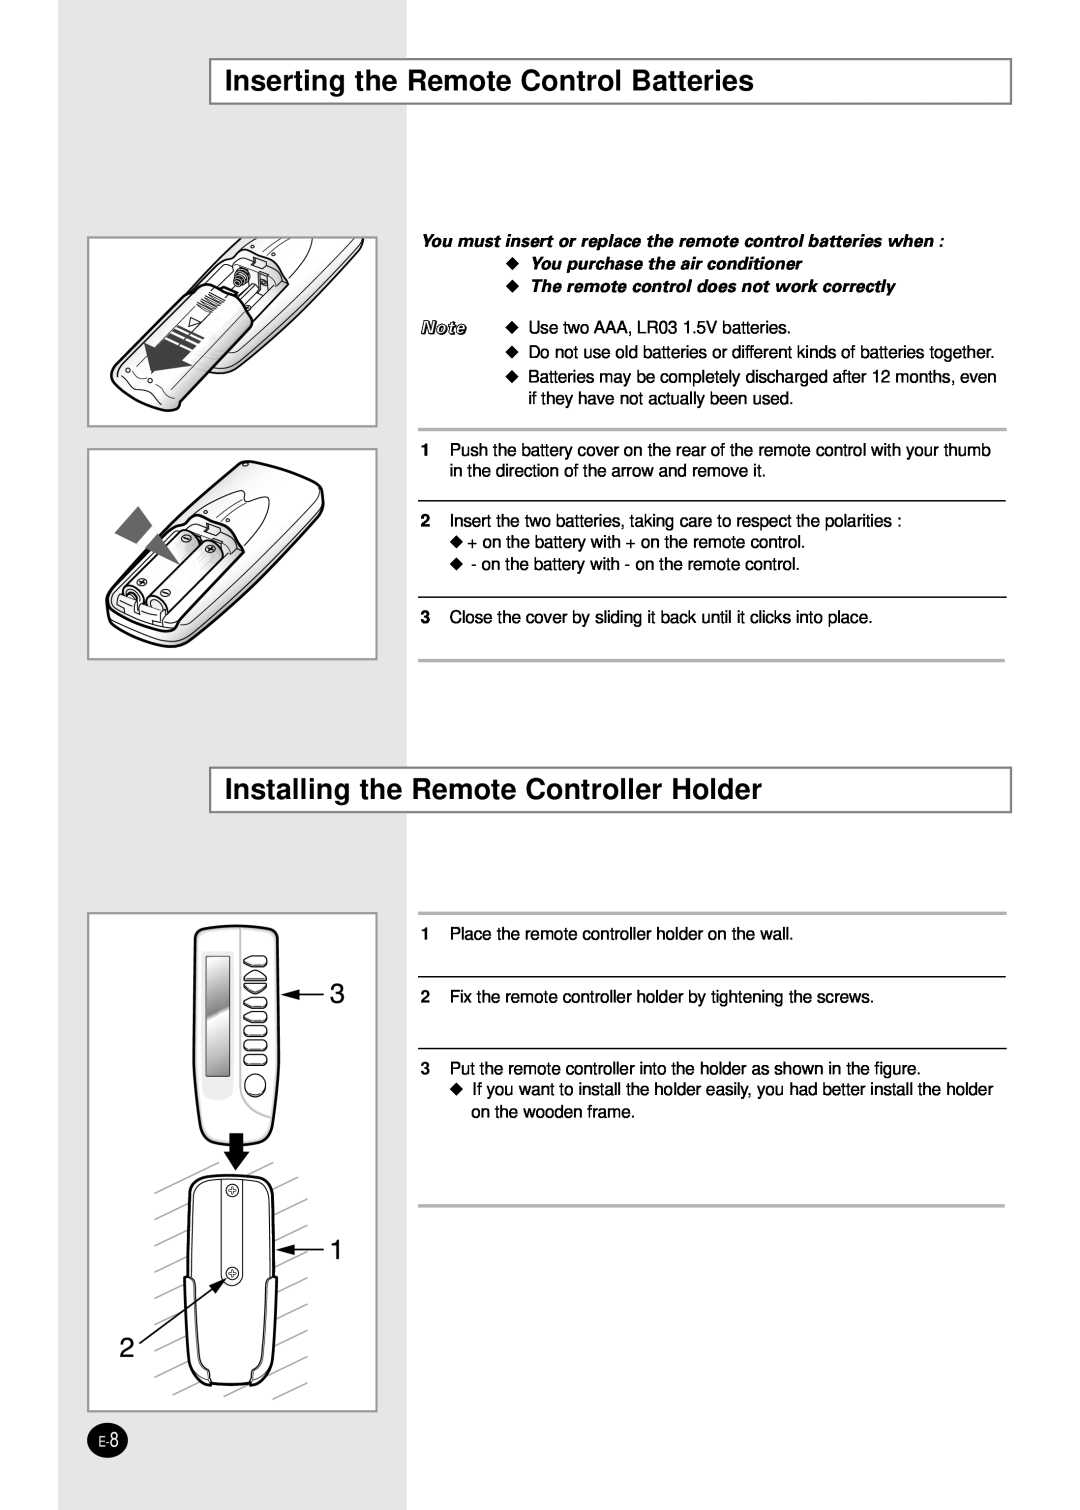 Samsung AD18B1C09 installation manual Inserting the Remote Control Batteries, Installing the Remote Controller Holder 